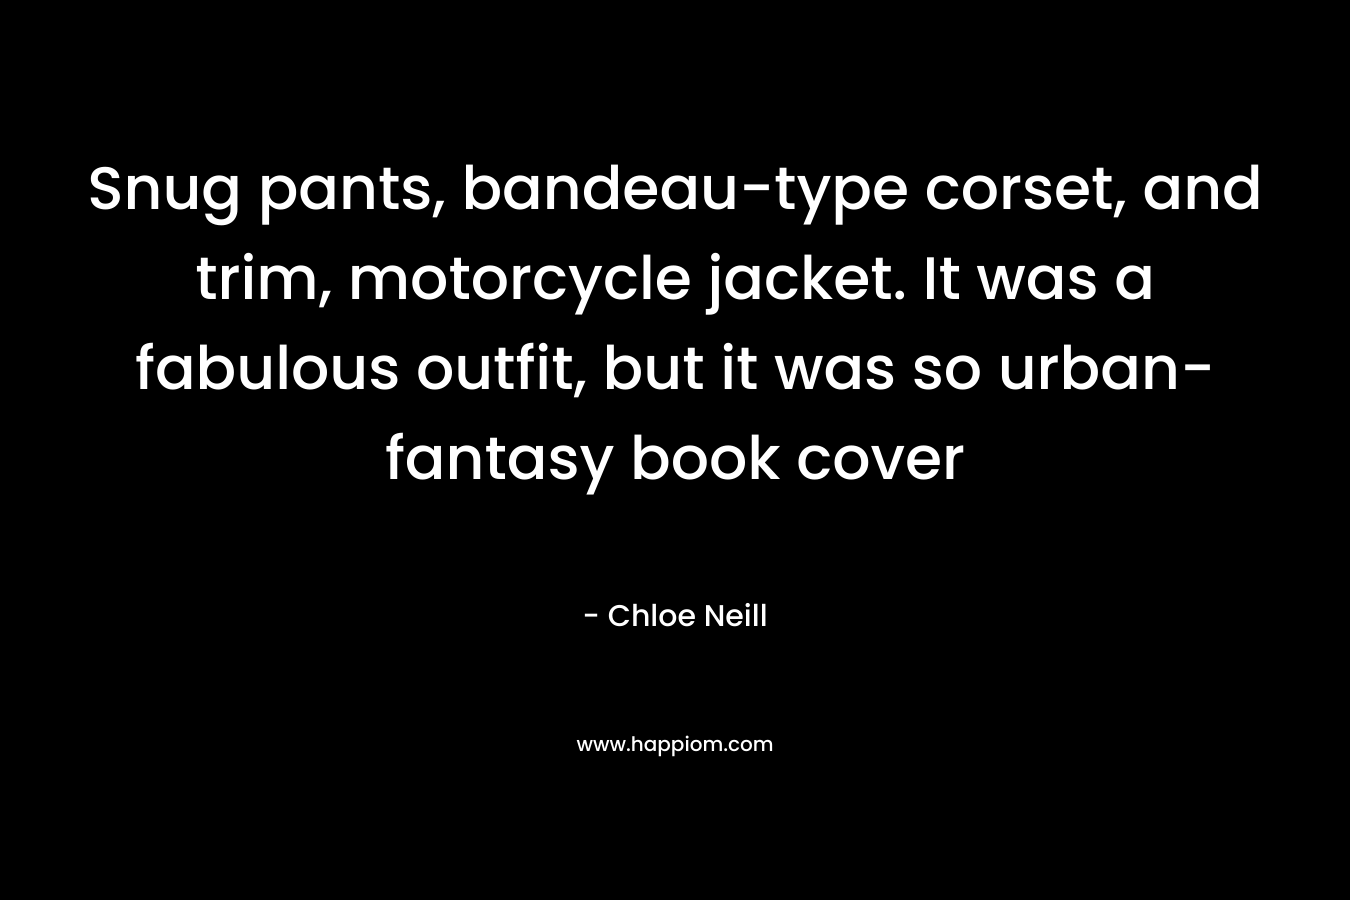 Snug pants, bandeau-type corset, and trim, motorcycle jacket. It was a fabulous outfit, but it was so urban-fantasy book cover